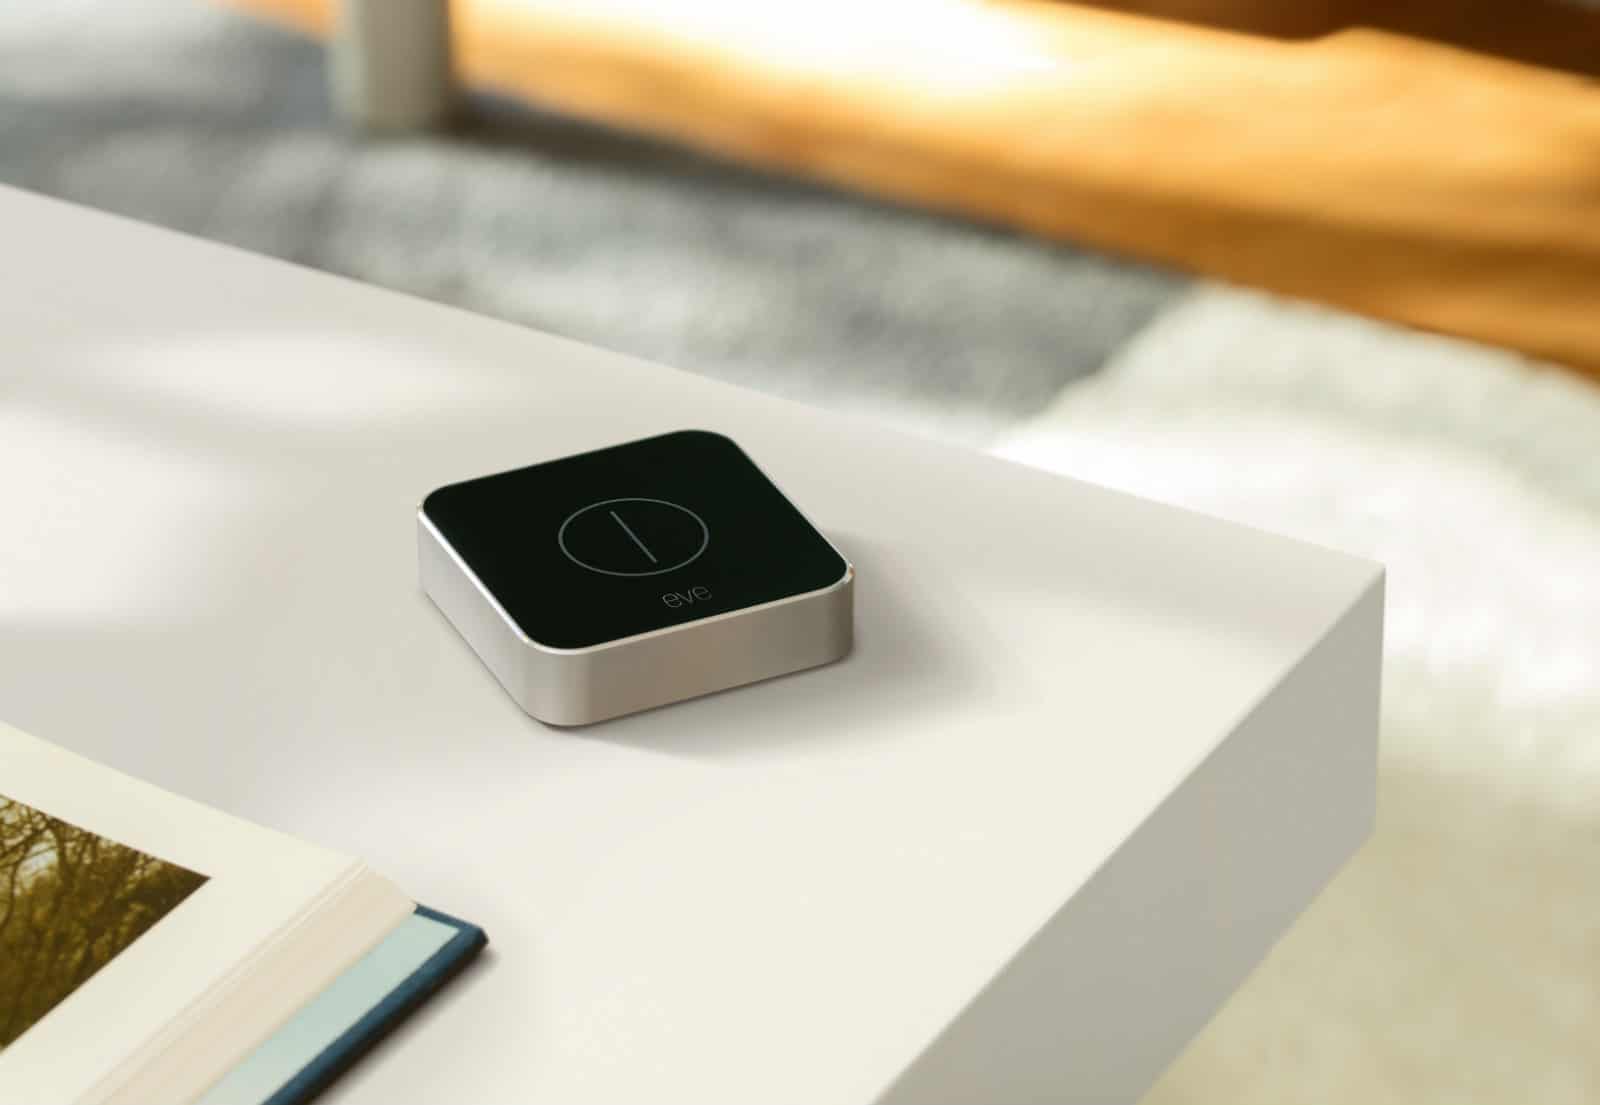 The Elgato Eve Button puts control of your HomeKit devices at your fingertips.